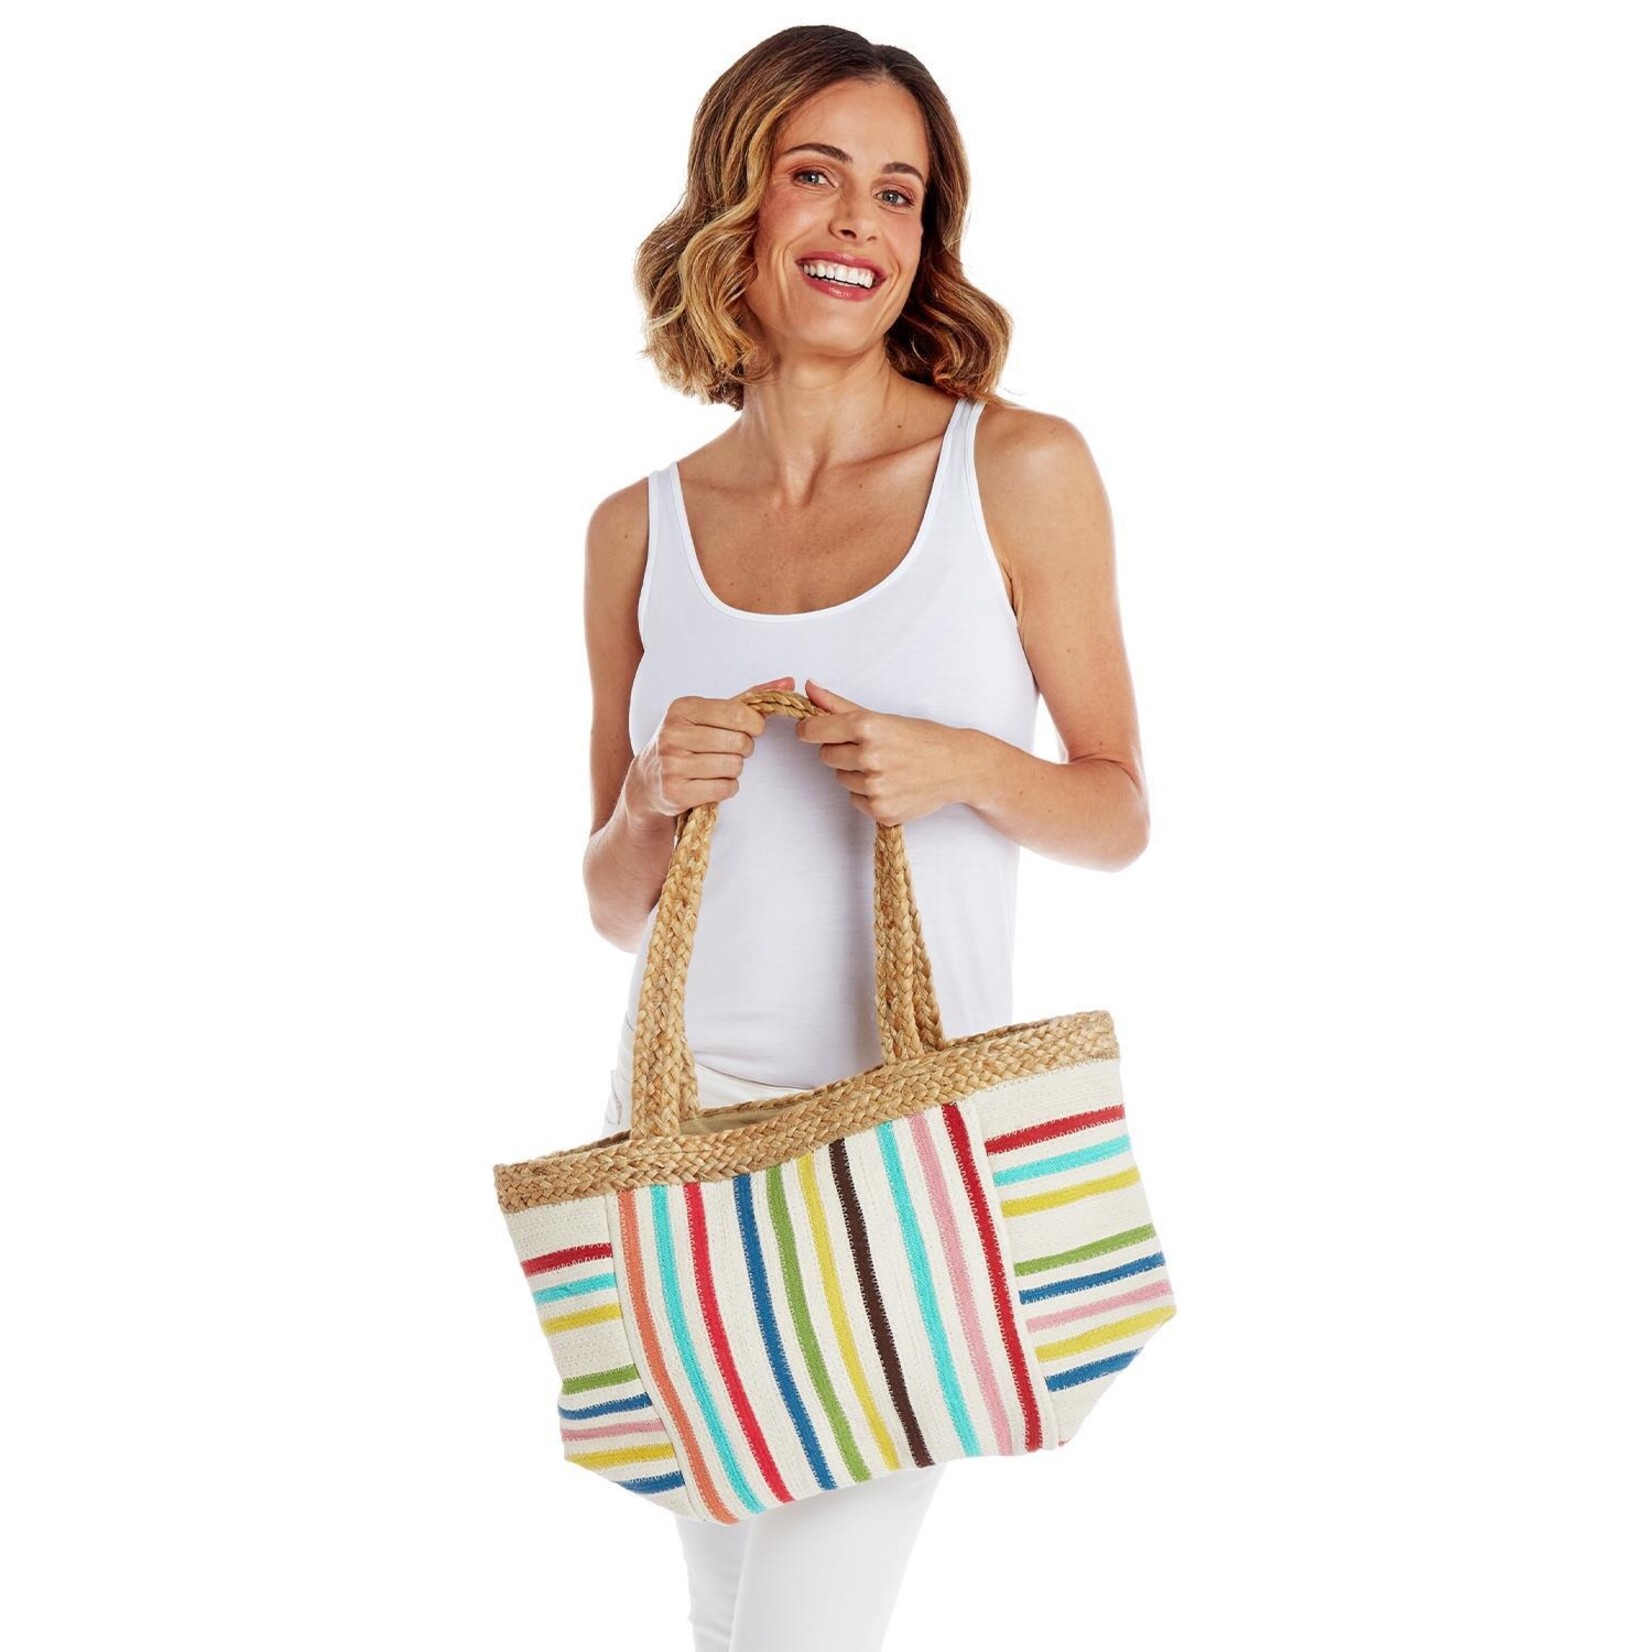 Two's Company, Inc. Powerful Stripes Multi Colored Stripes Woven Jute Tote Bag with Snap Closure and Lined Interior